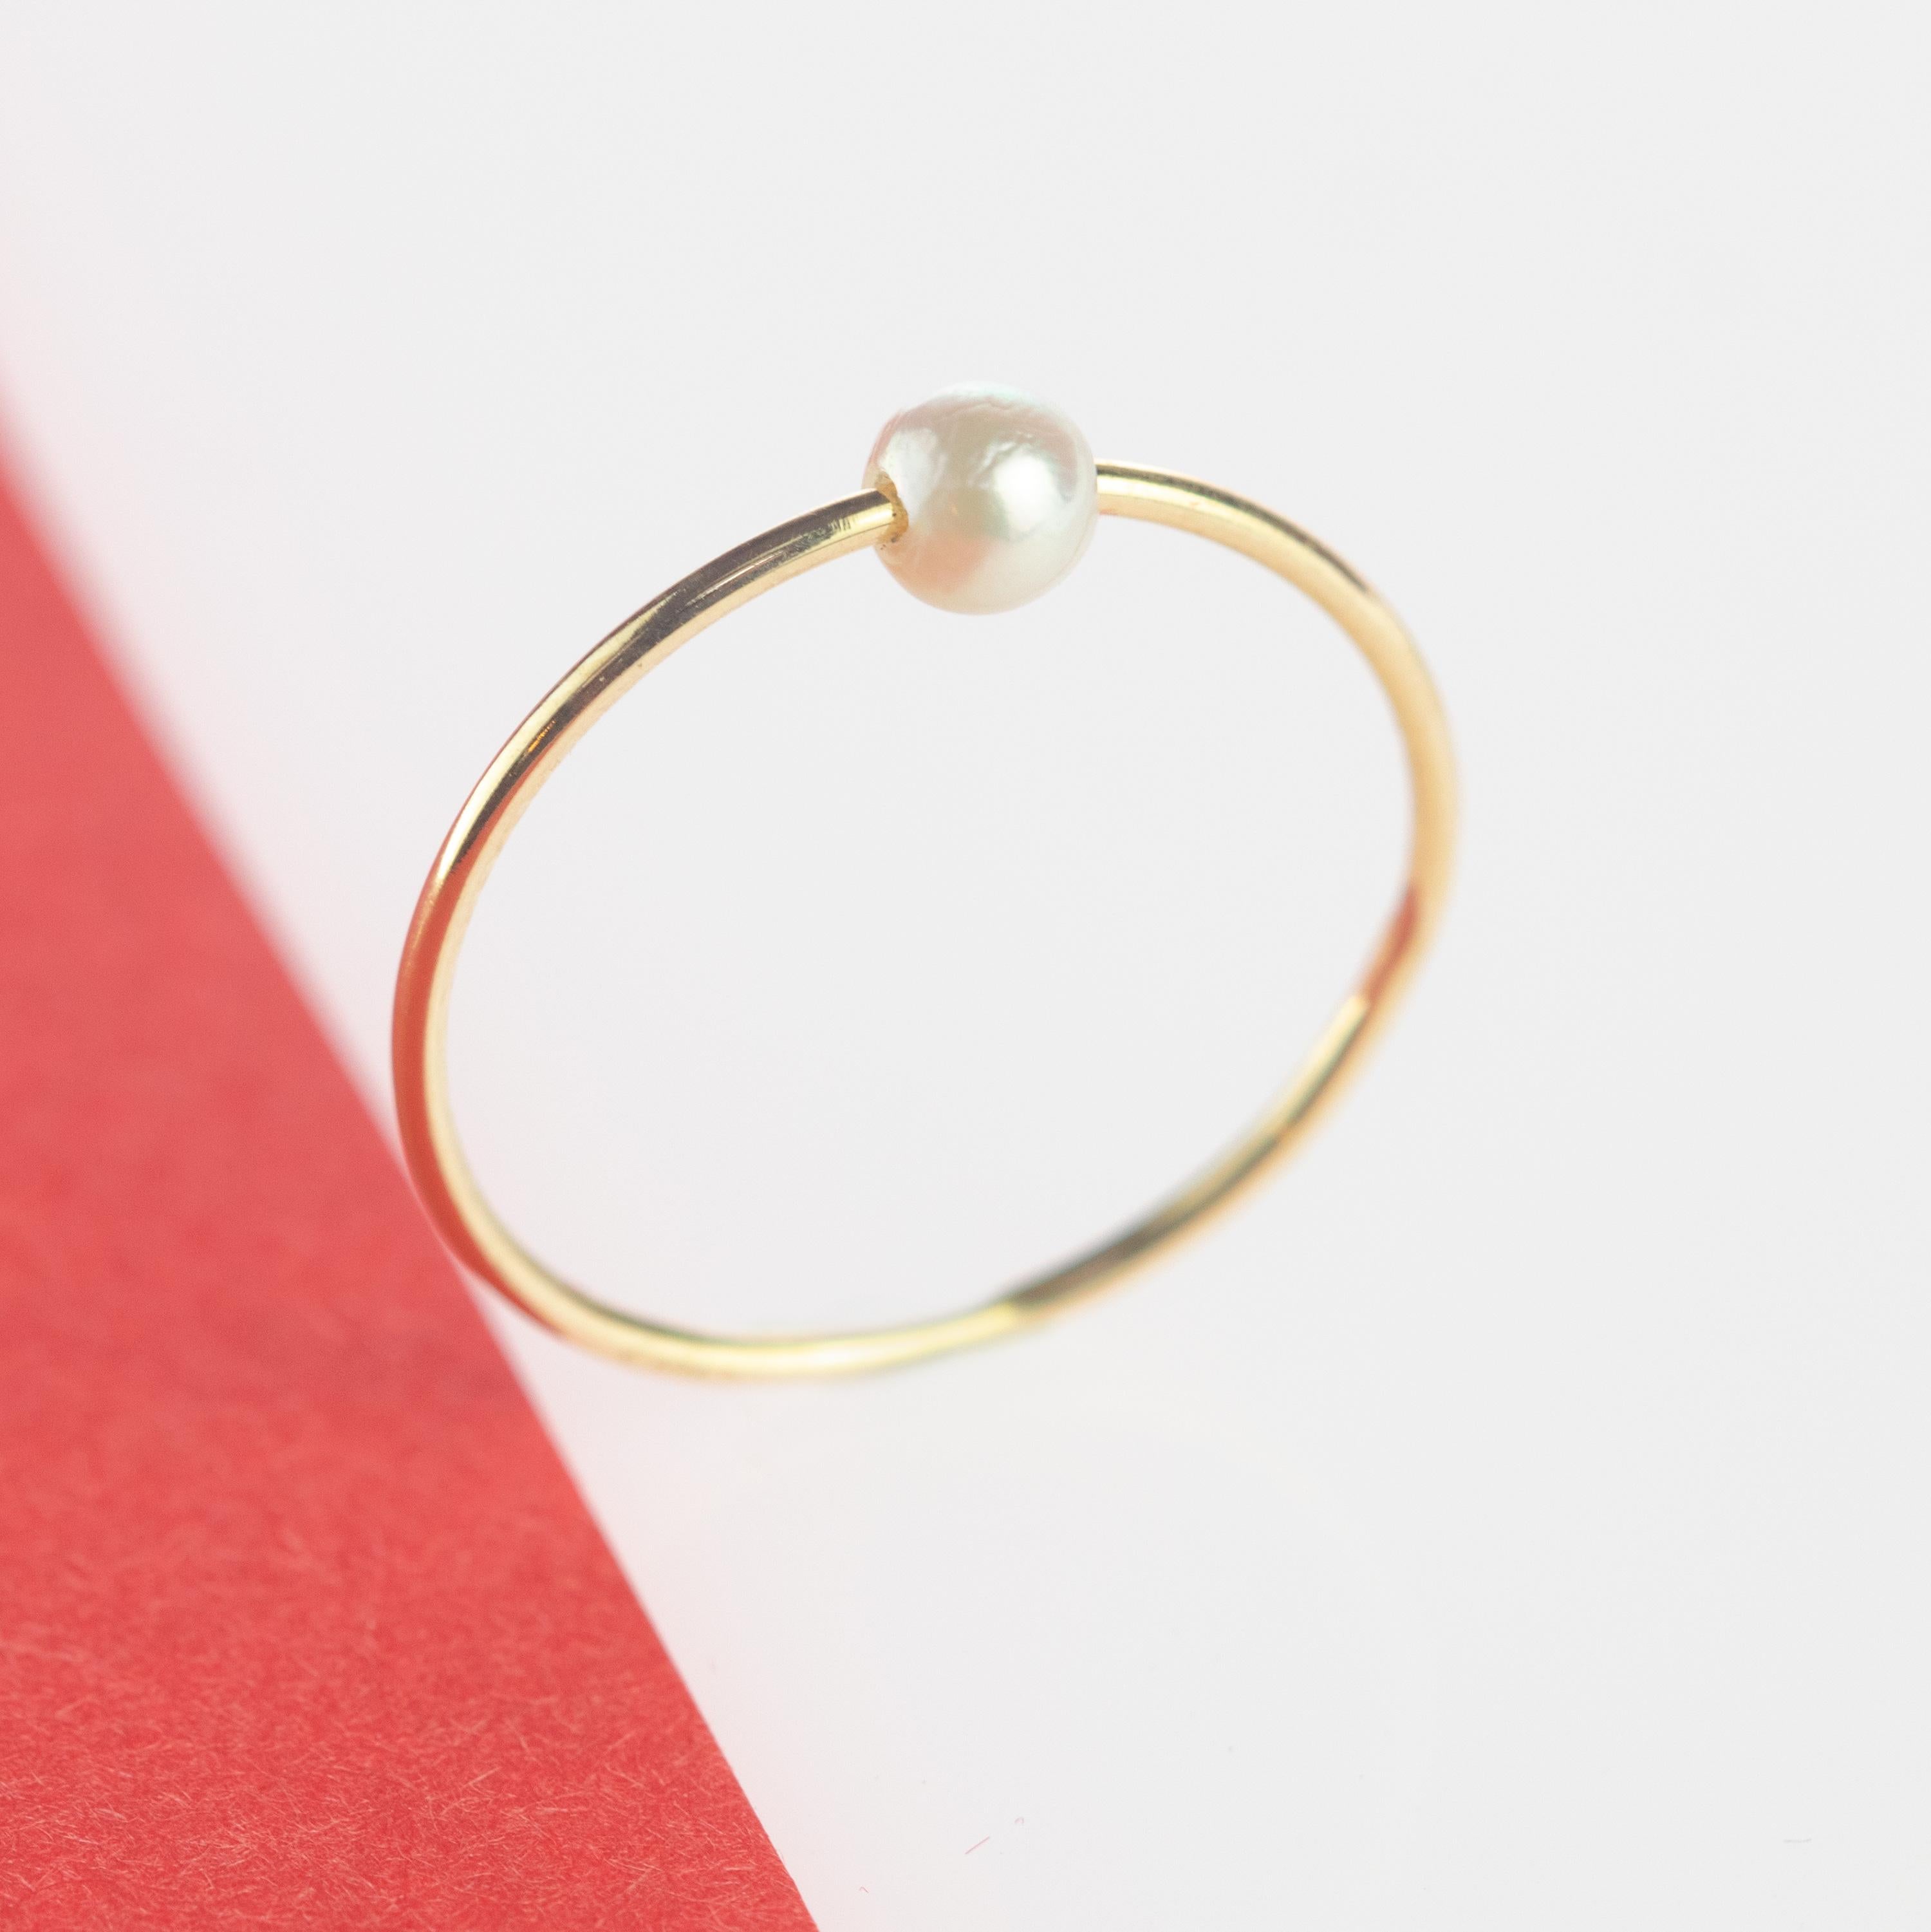 Signature INTINI Jewels Moon band planet ring. Contemporary ring design in 18 karat yellow gold with a precious round Freshwater Pearl .  Design and color mixed in one jewel. Delight yourself with a strong, minimalist design, just for a stunning